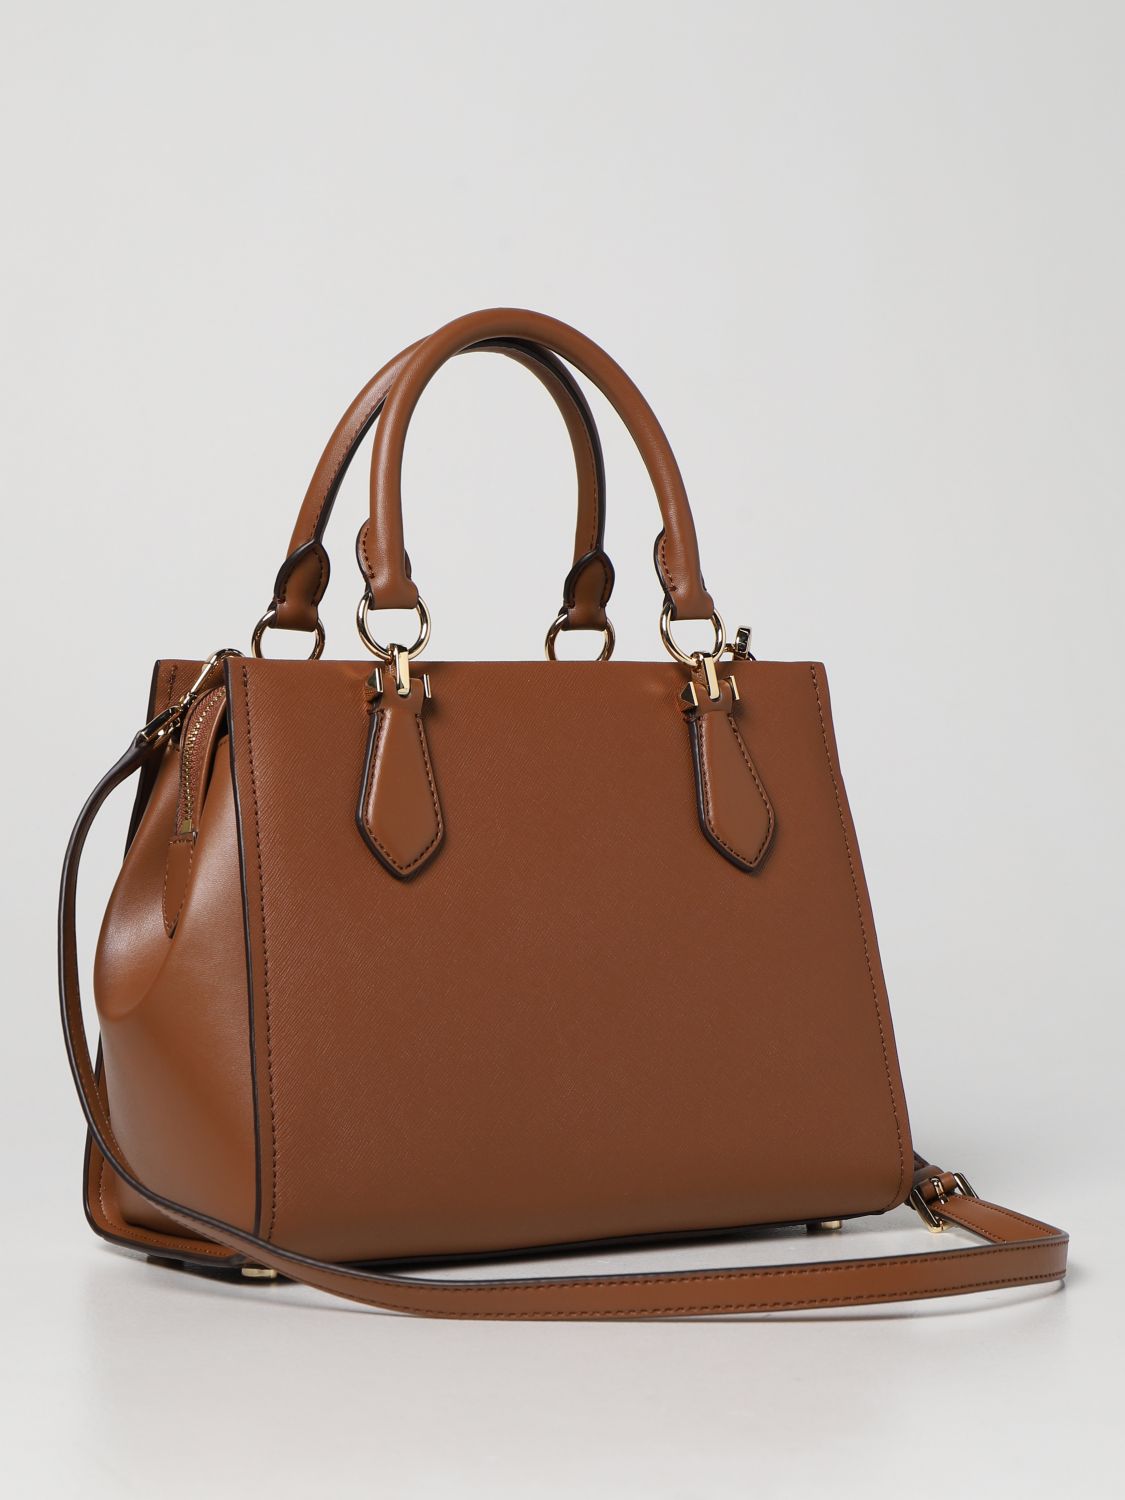 MICHAEL KORS: Marilyn Michael bag in Saffiano leather - Leather